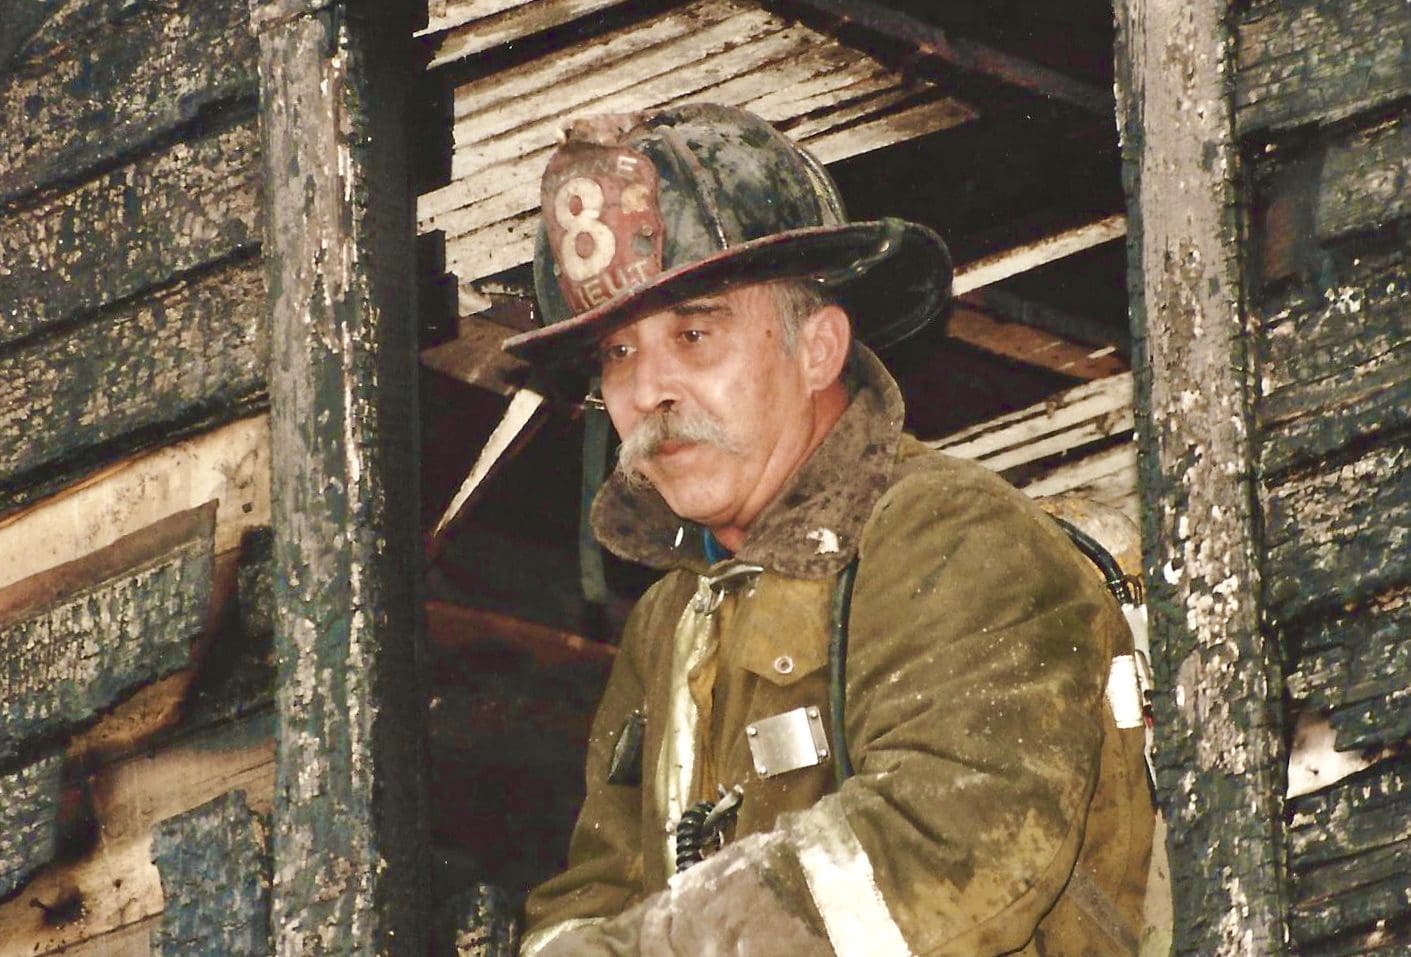 A firefighter standing in the window of an old house.